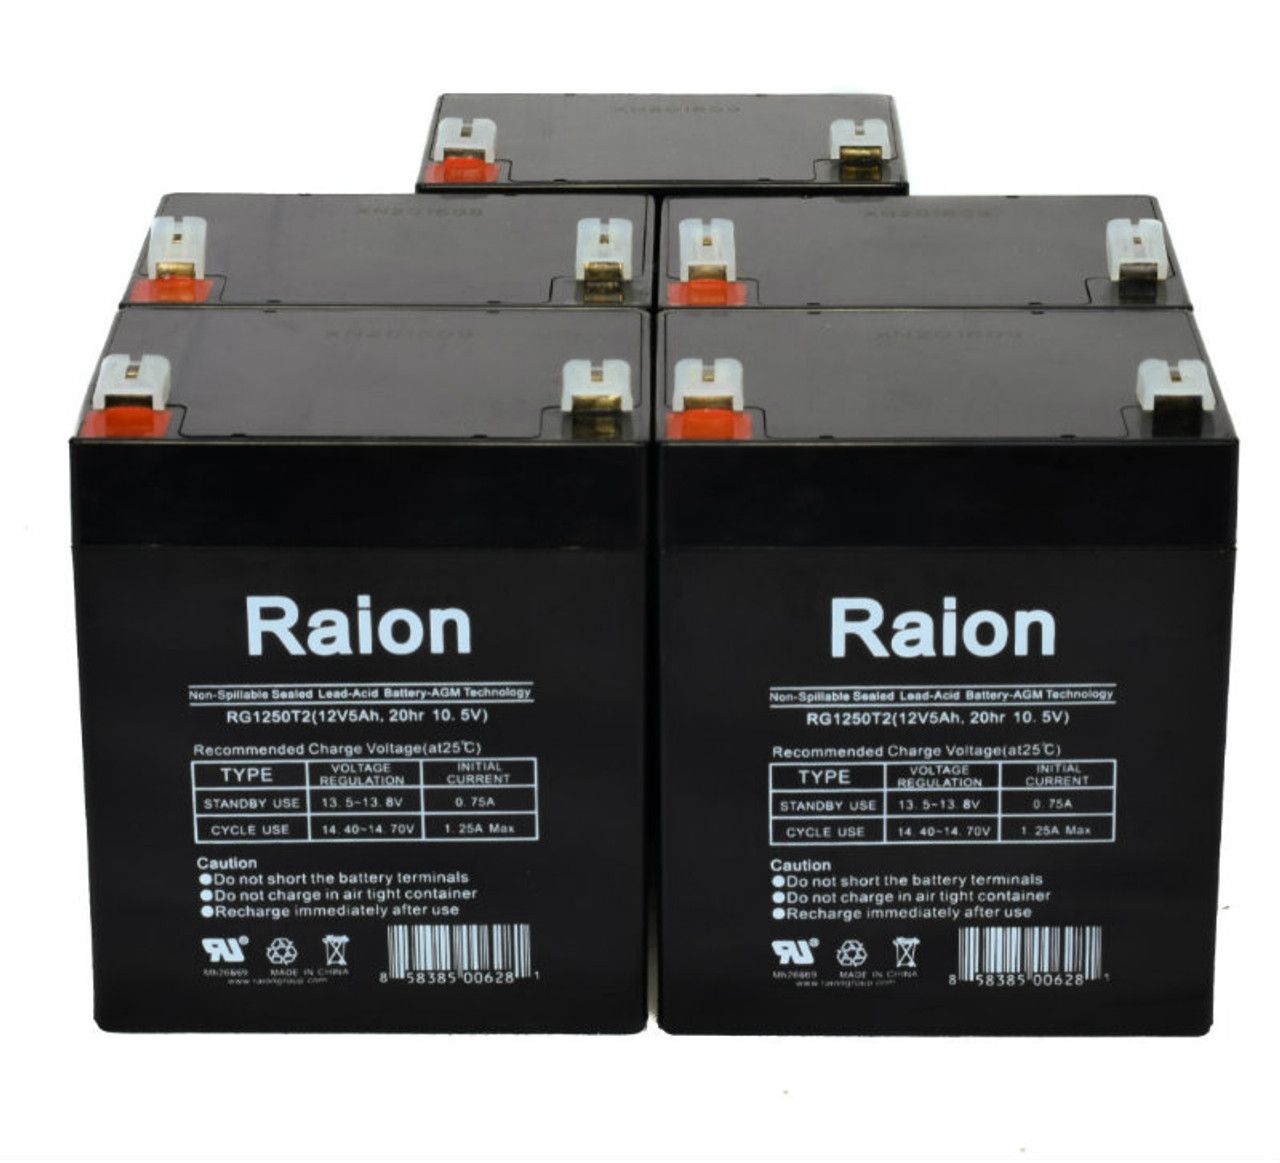 Raion Power RG1250T1 Replacement Fire Alarm Control Panel Battery for Napco Alarms - 8 Pack